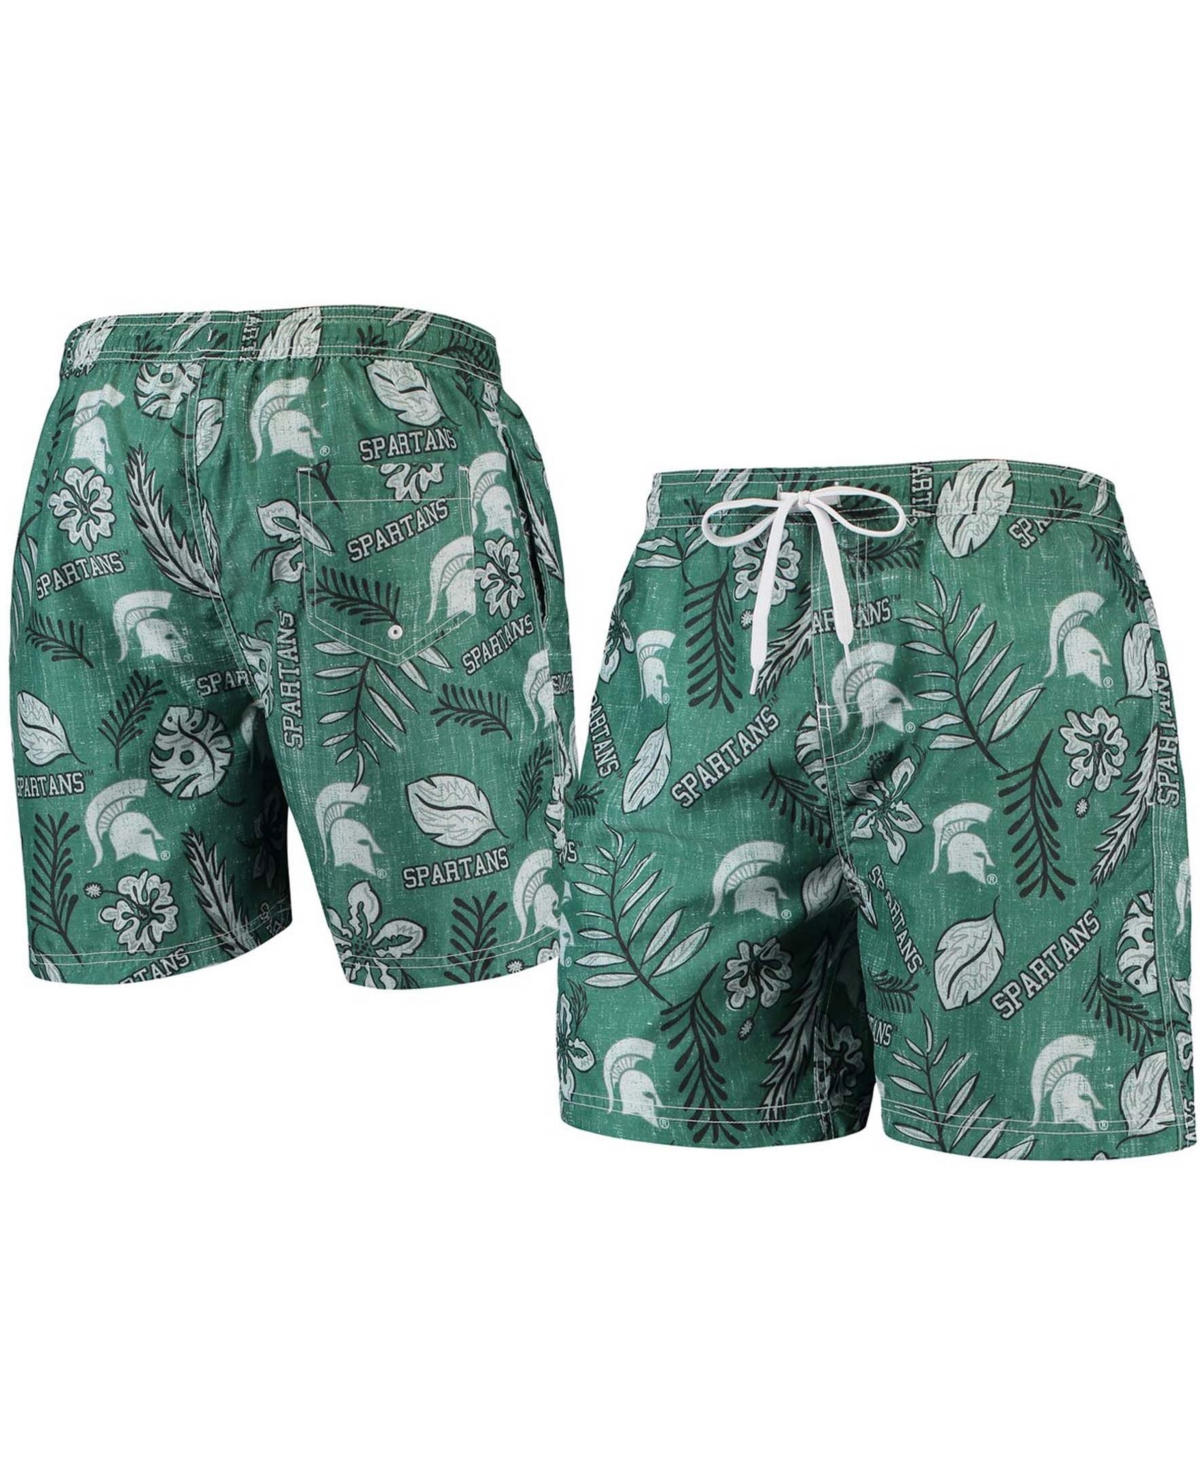 Men's Green Michigan State Spartans Vintage-Like Floral Swim Trunks - Green